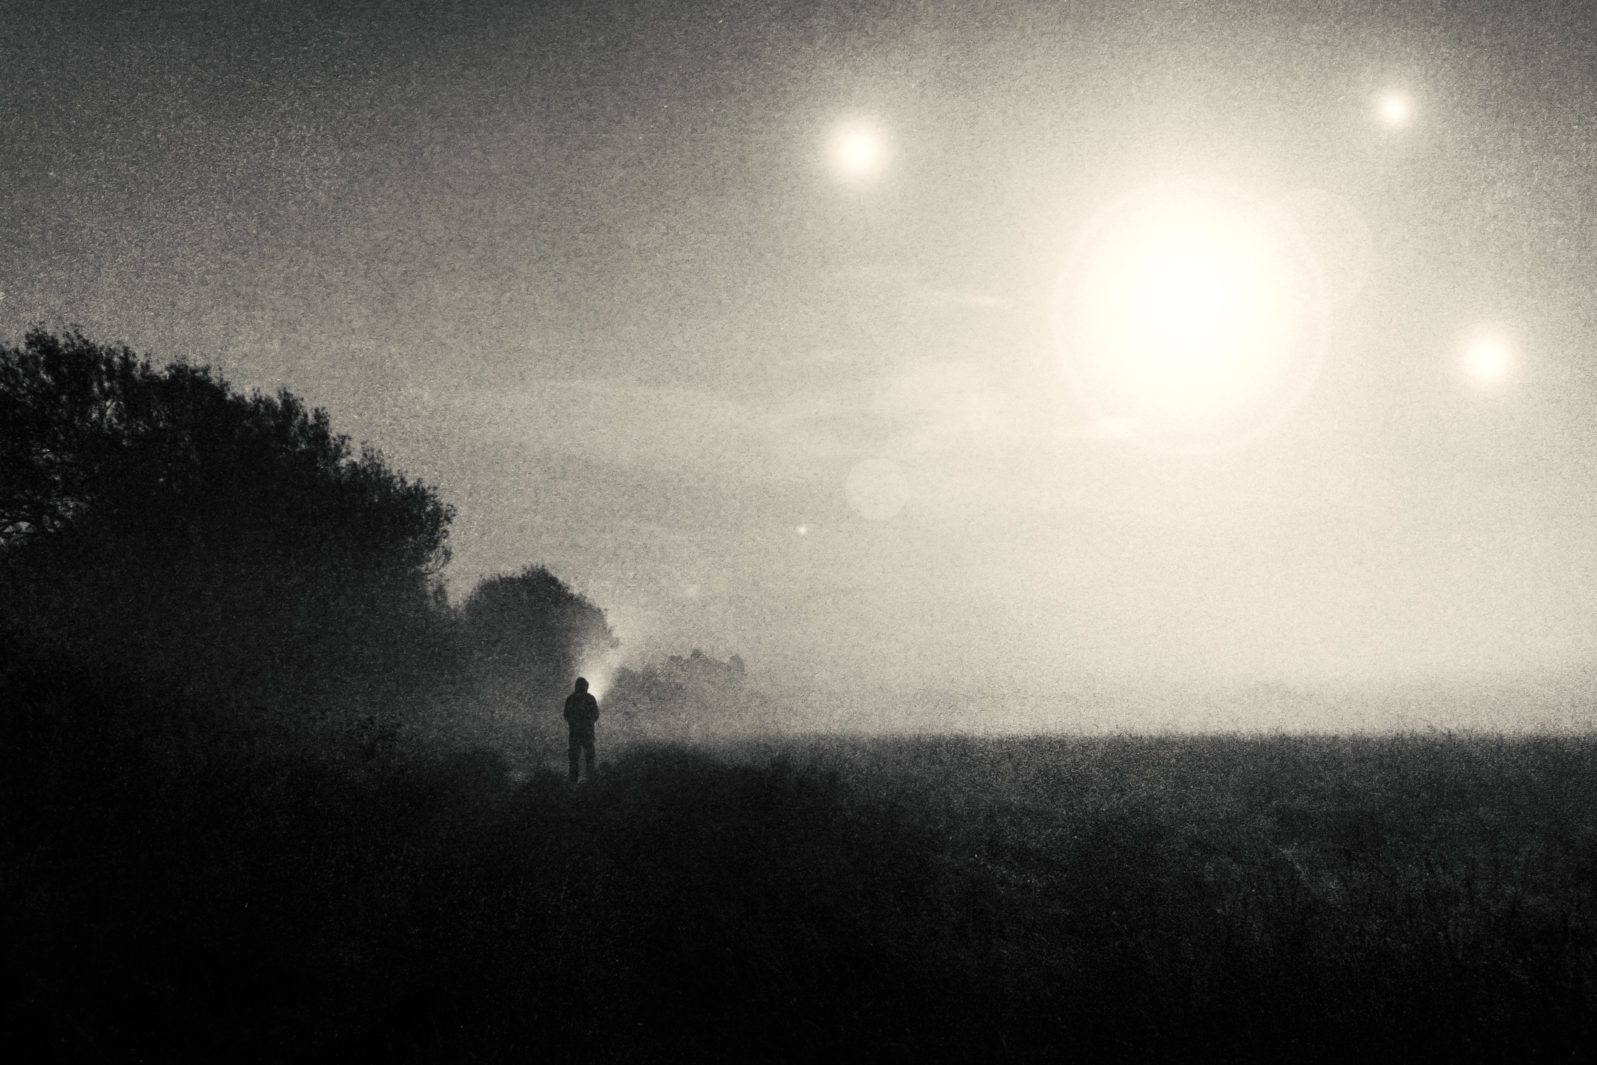 A moody science fiction concept, of a figure standing in a field with UFO lights glowing in the sky. On a foggy spooky night. With a vintage, grunge edit